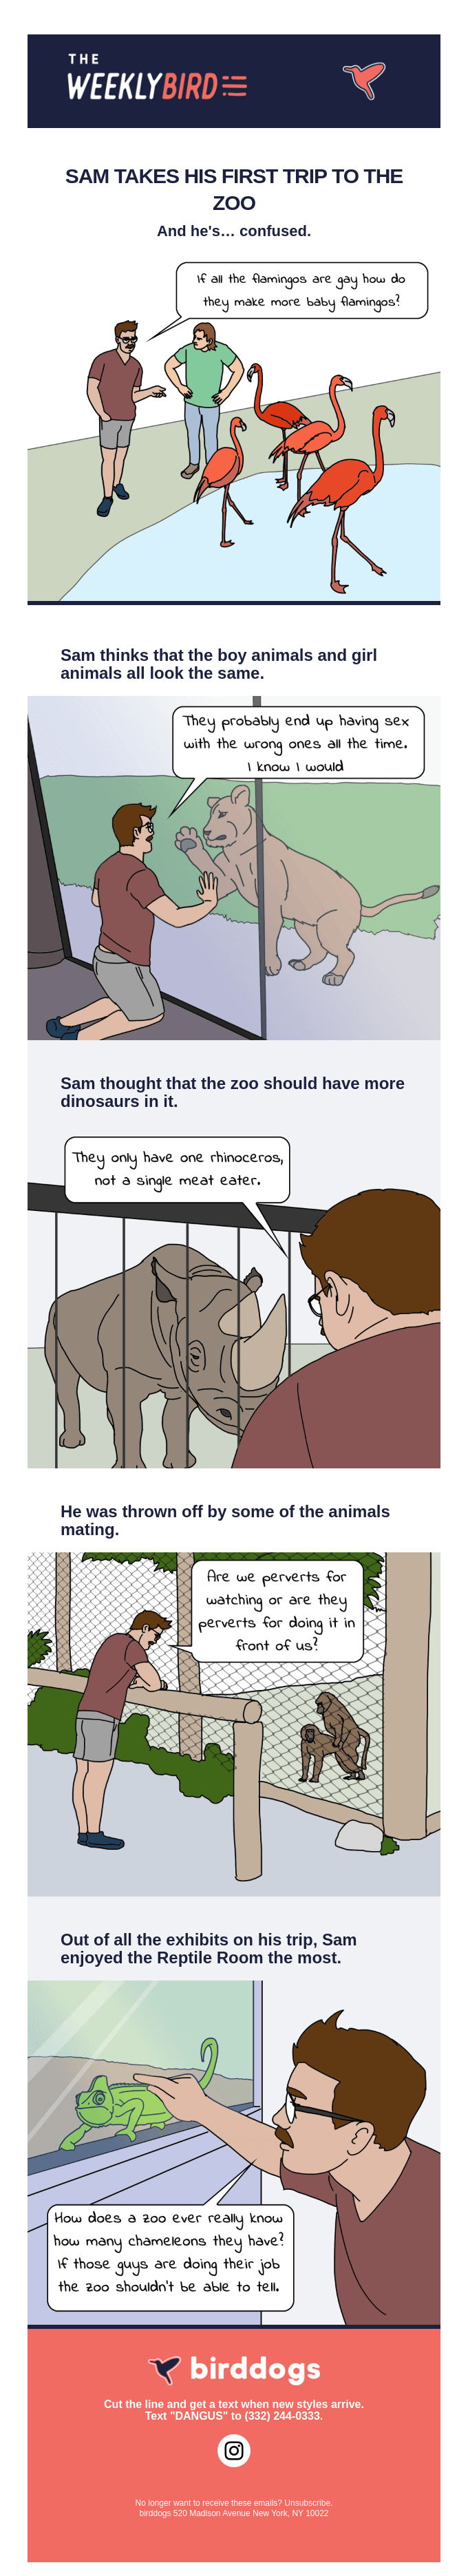 Sam Takes His First Trip To The Zoo